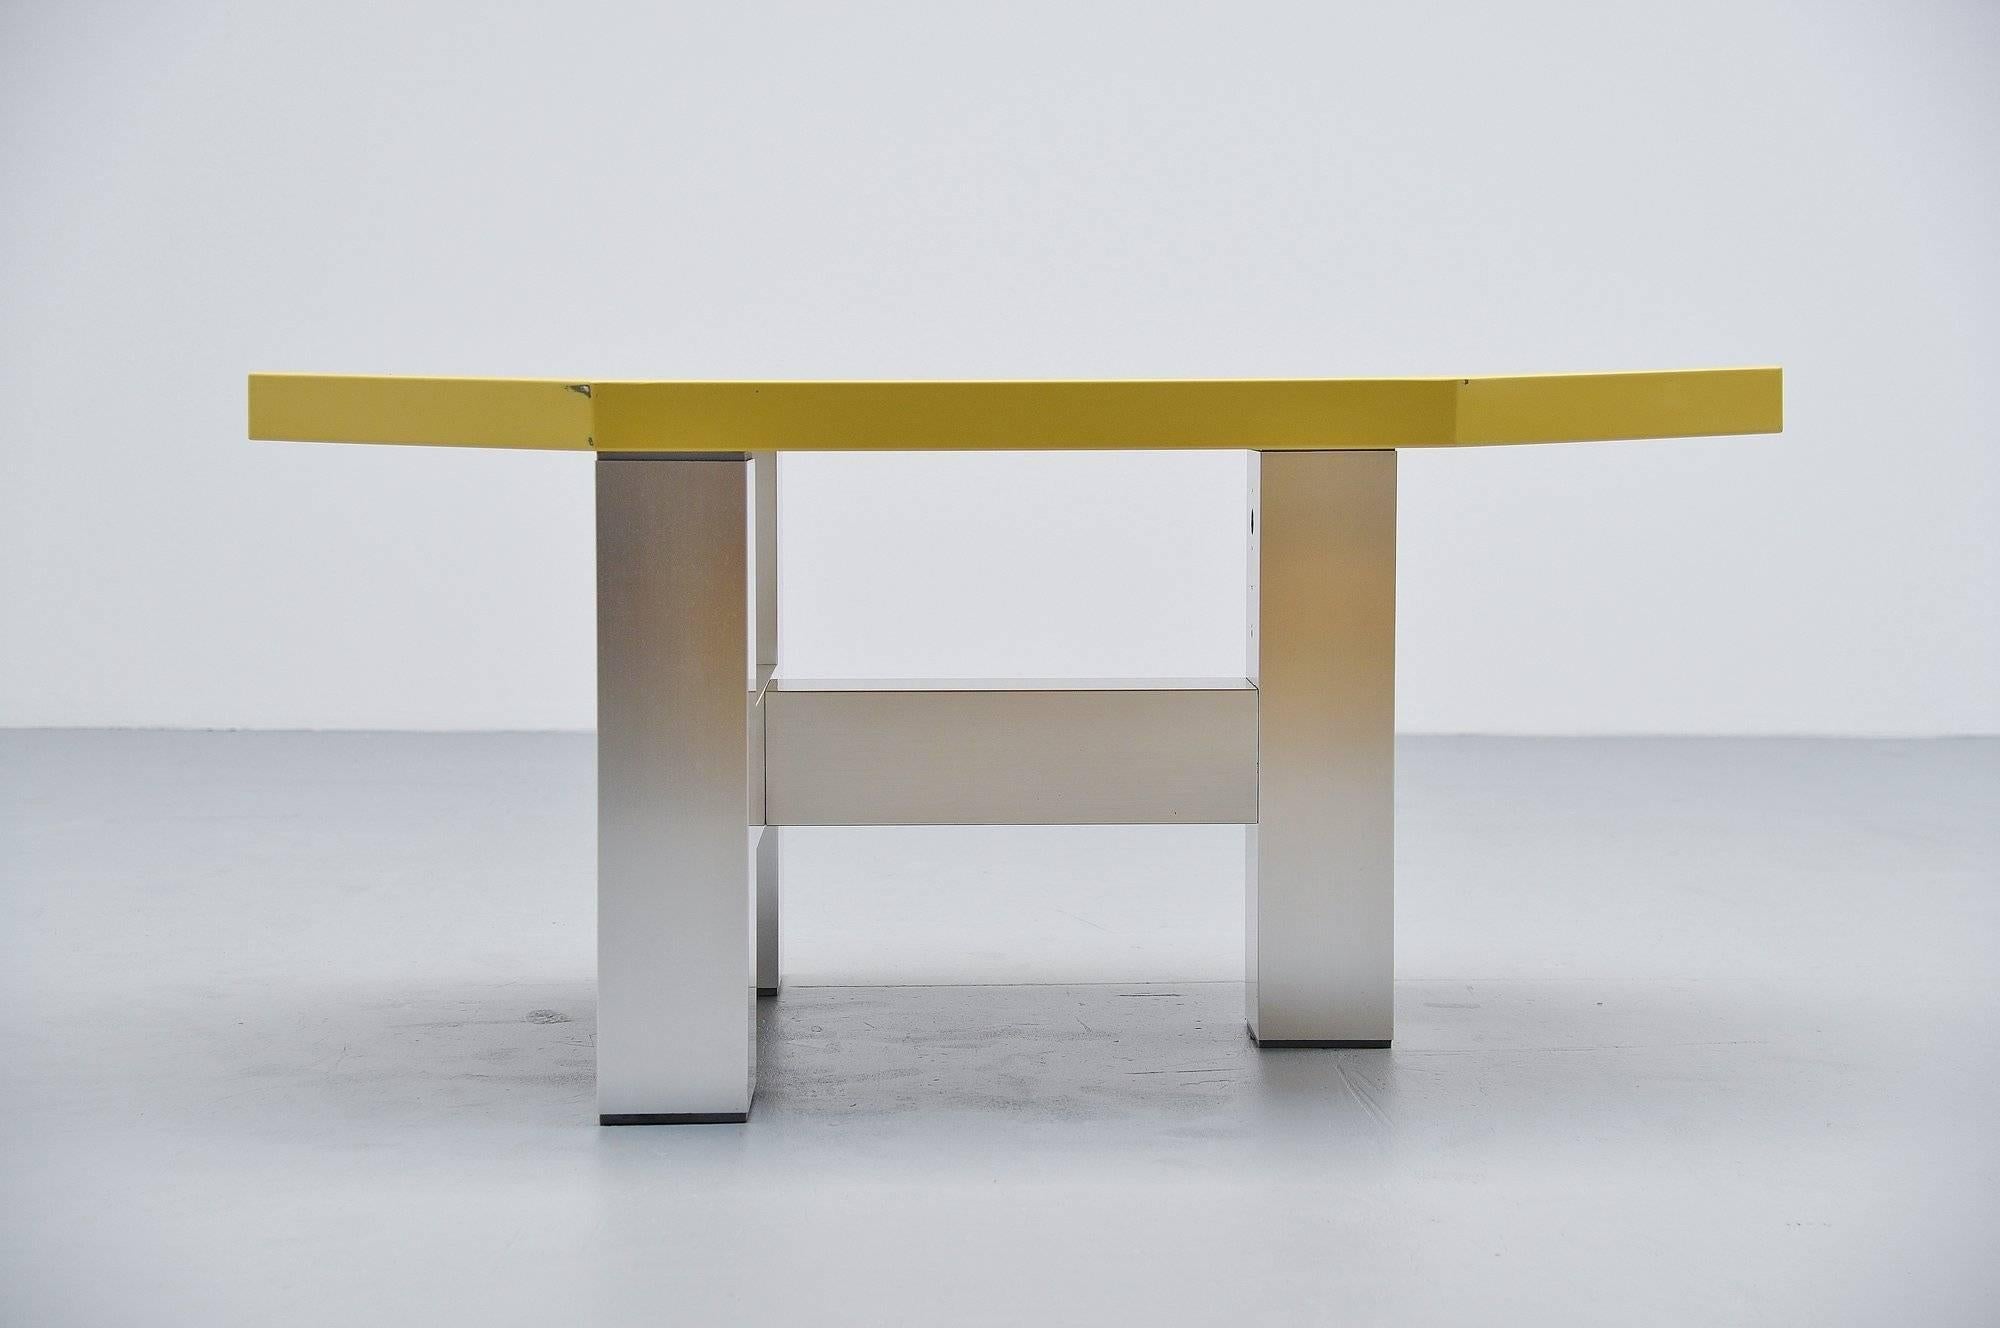 Rare modernist table designed by Martin Visser and Joke van der Heyden, manufactured by ’t Spectrum Bergeyk 1988. This table is model number TE21 and has an aluminium base and a yellow painted top with die cut dot pattern. Fantastic unusual shaped